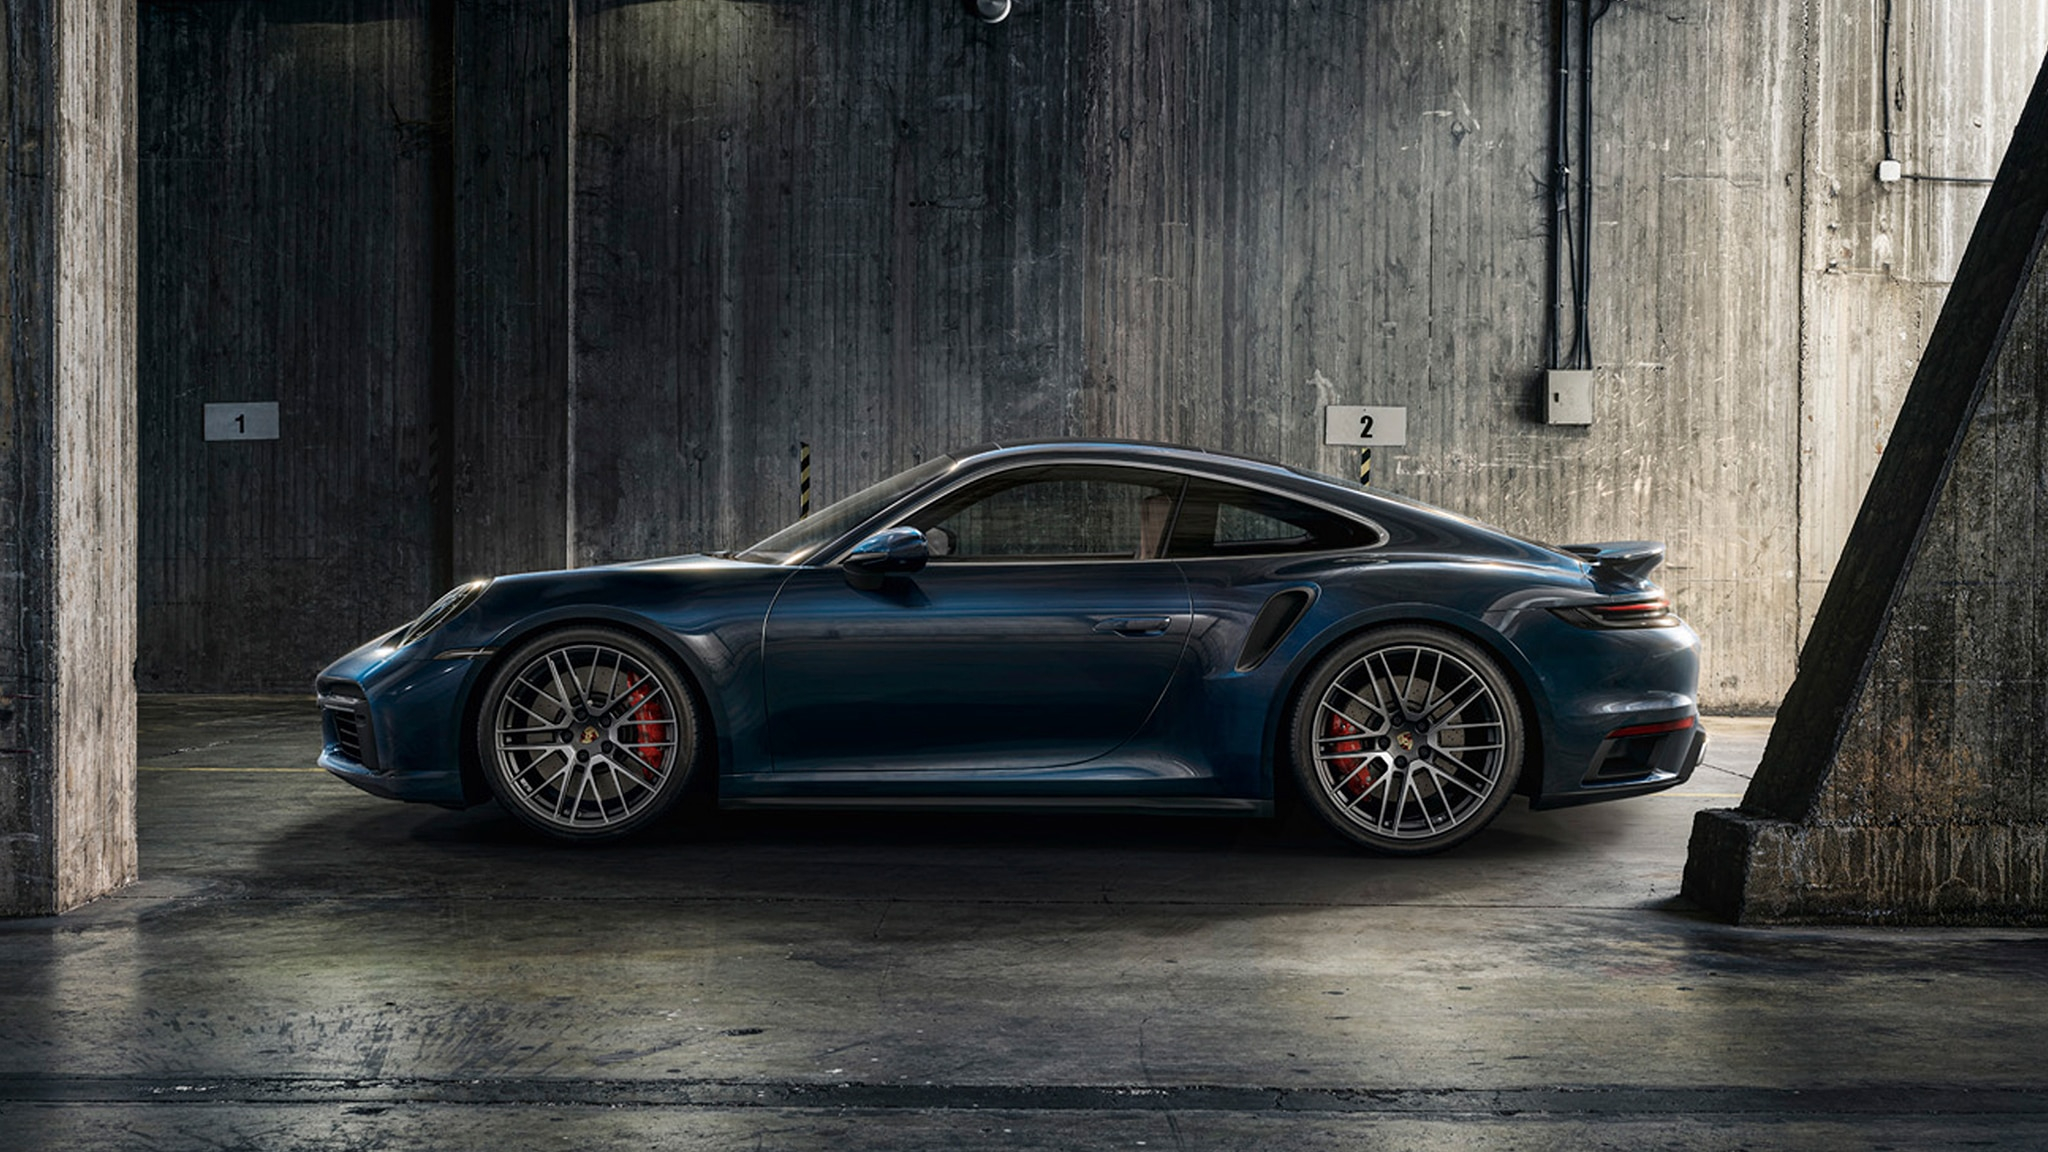 The New 2021 Porsche 911 Turbo Is Quicker Than The Old 911 